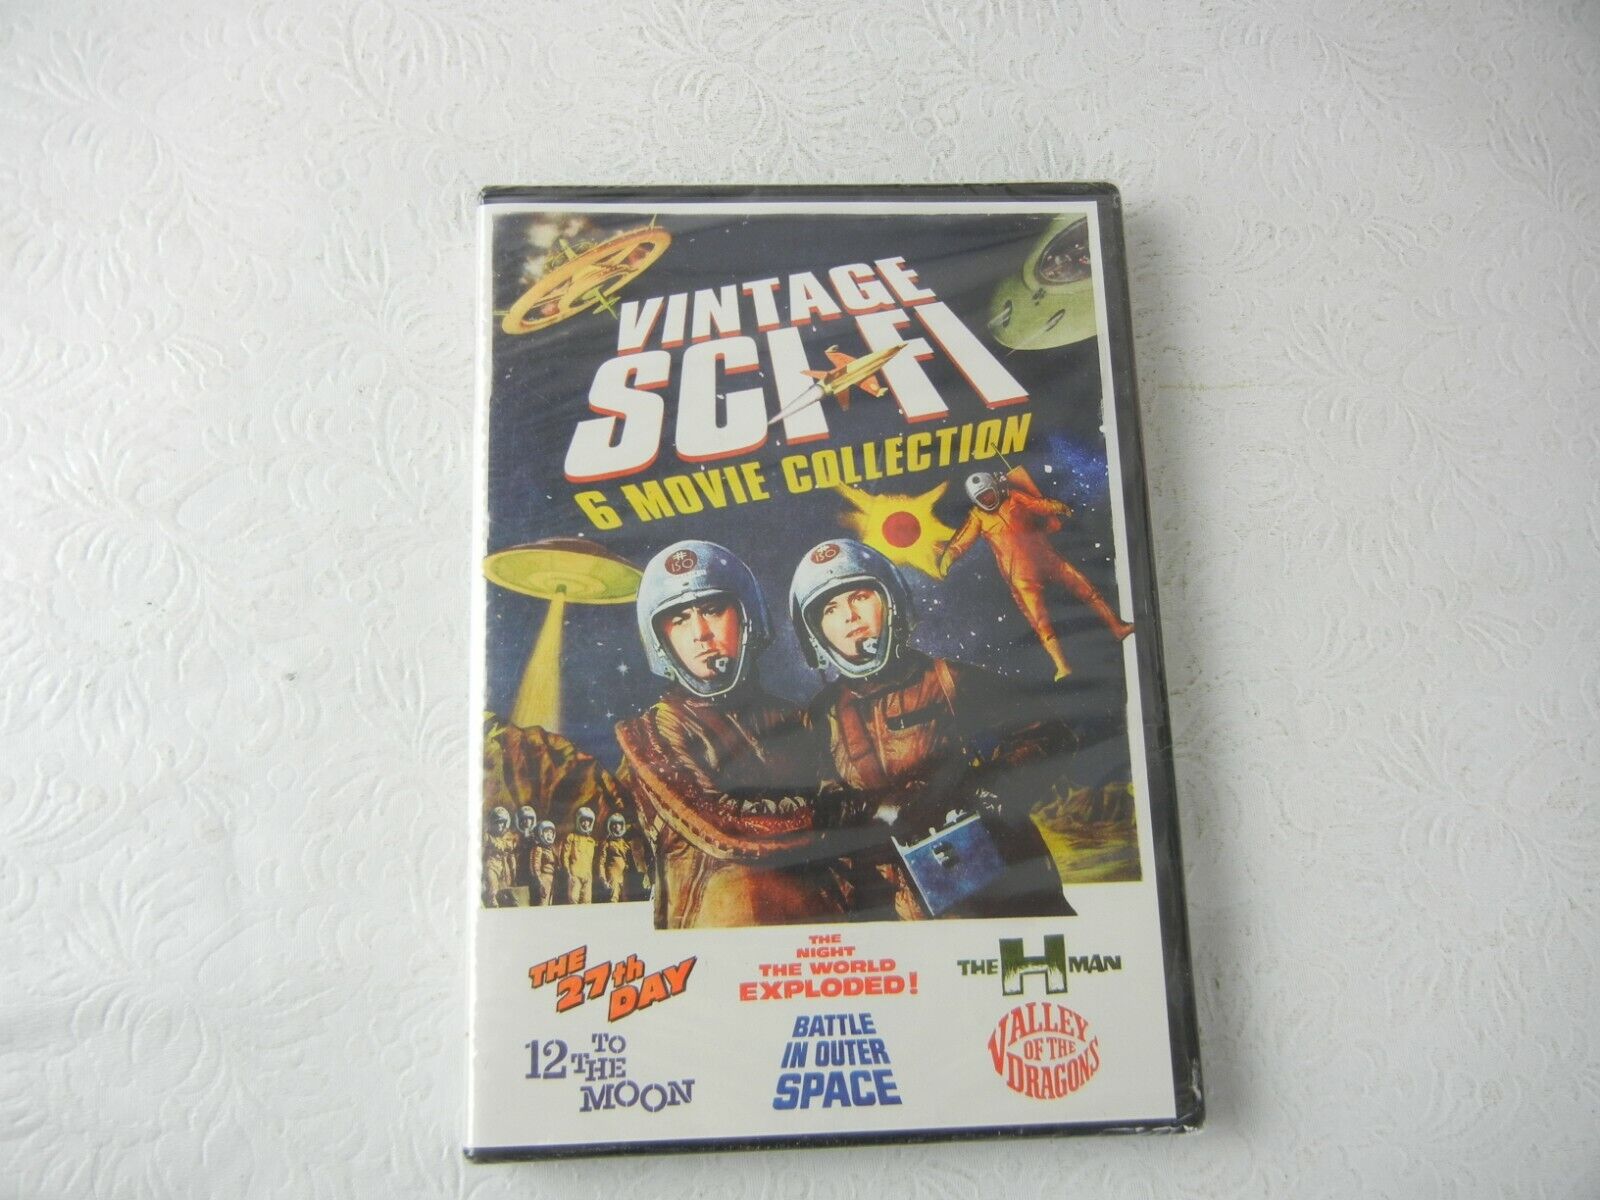 Vintage Sci Fi 6 Movie Collection DVD NEW